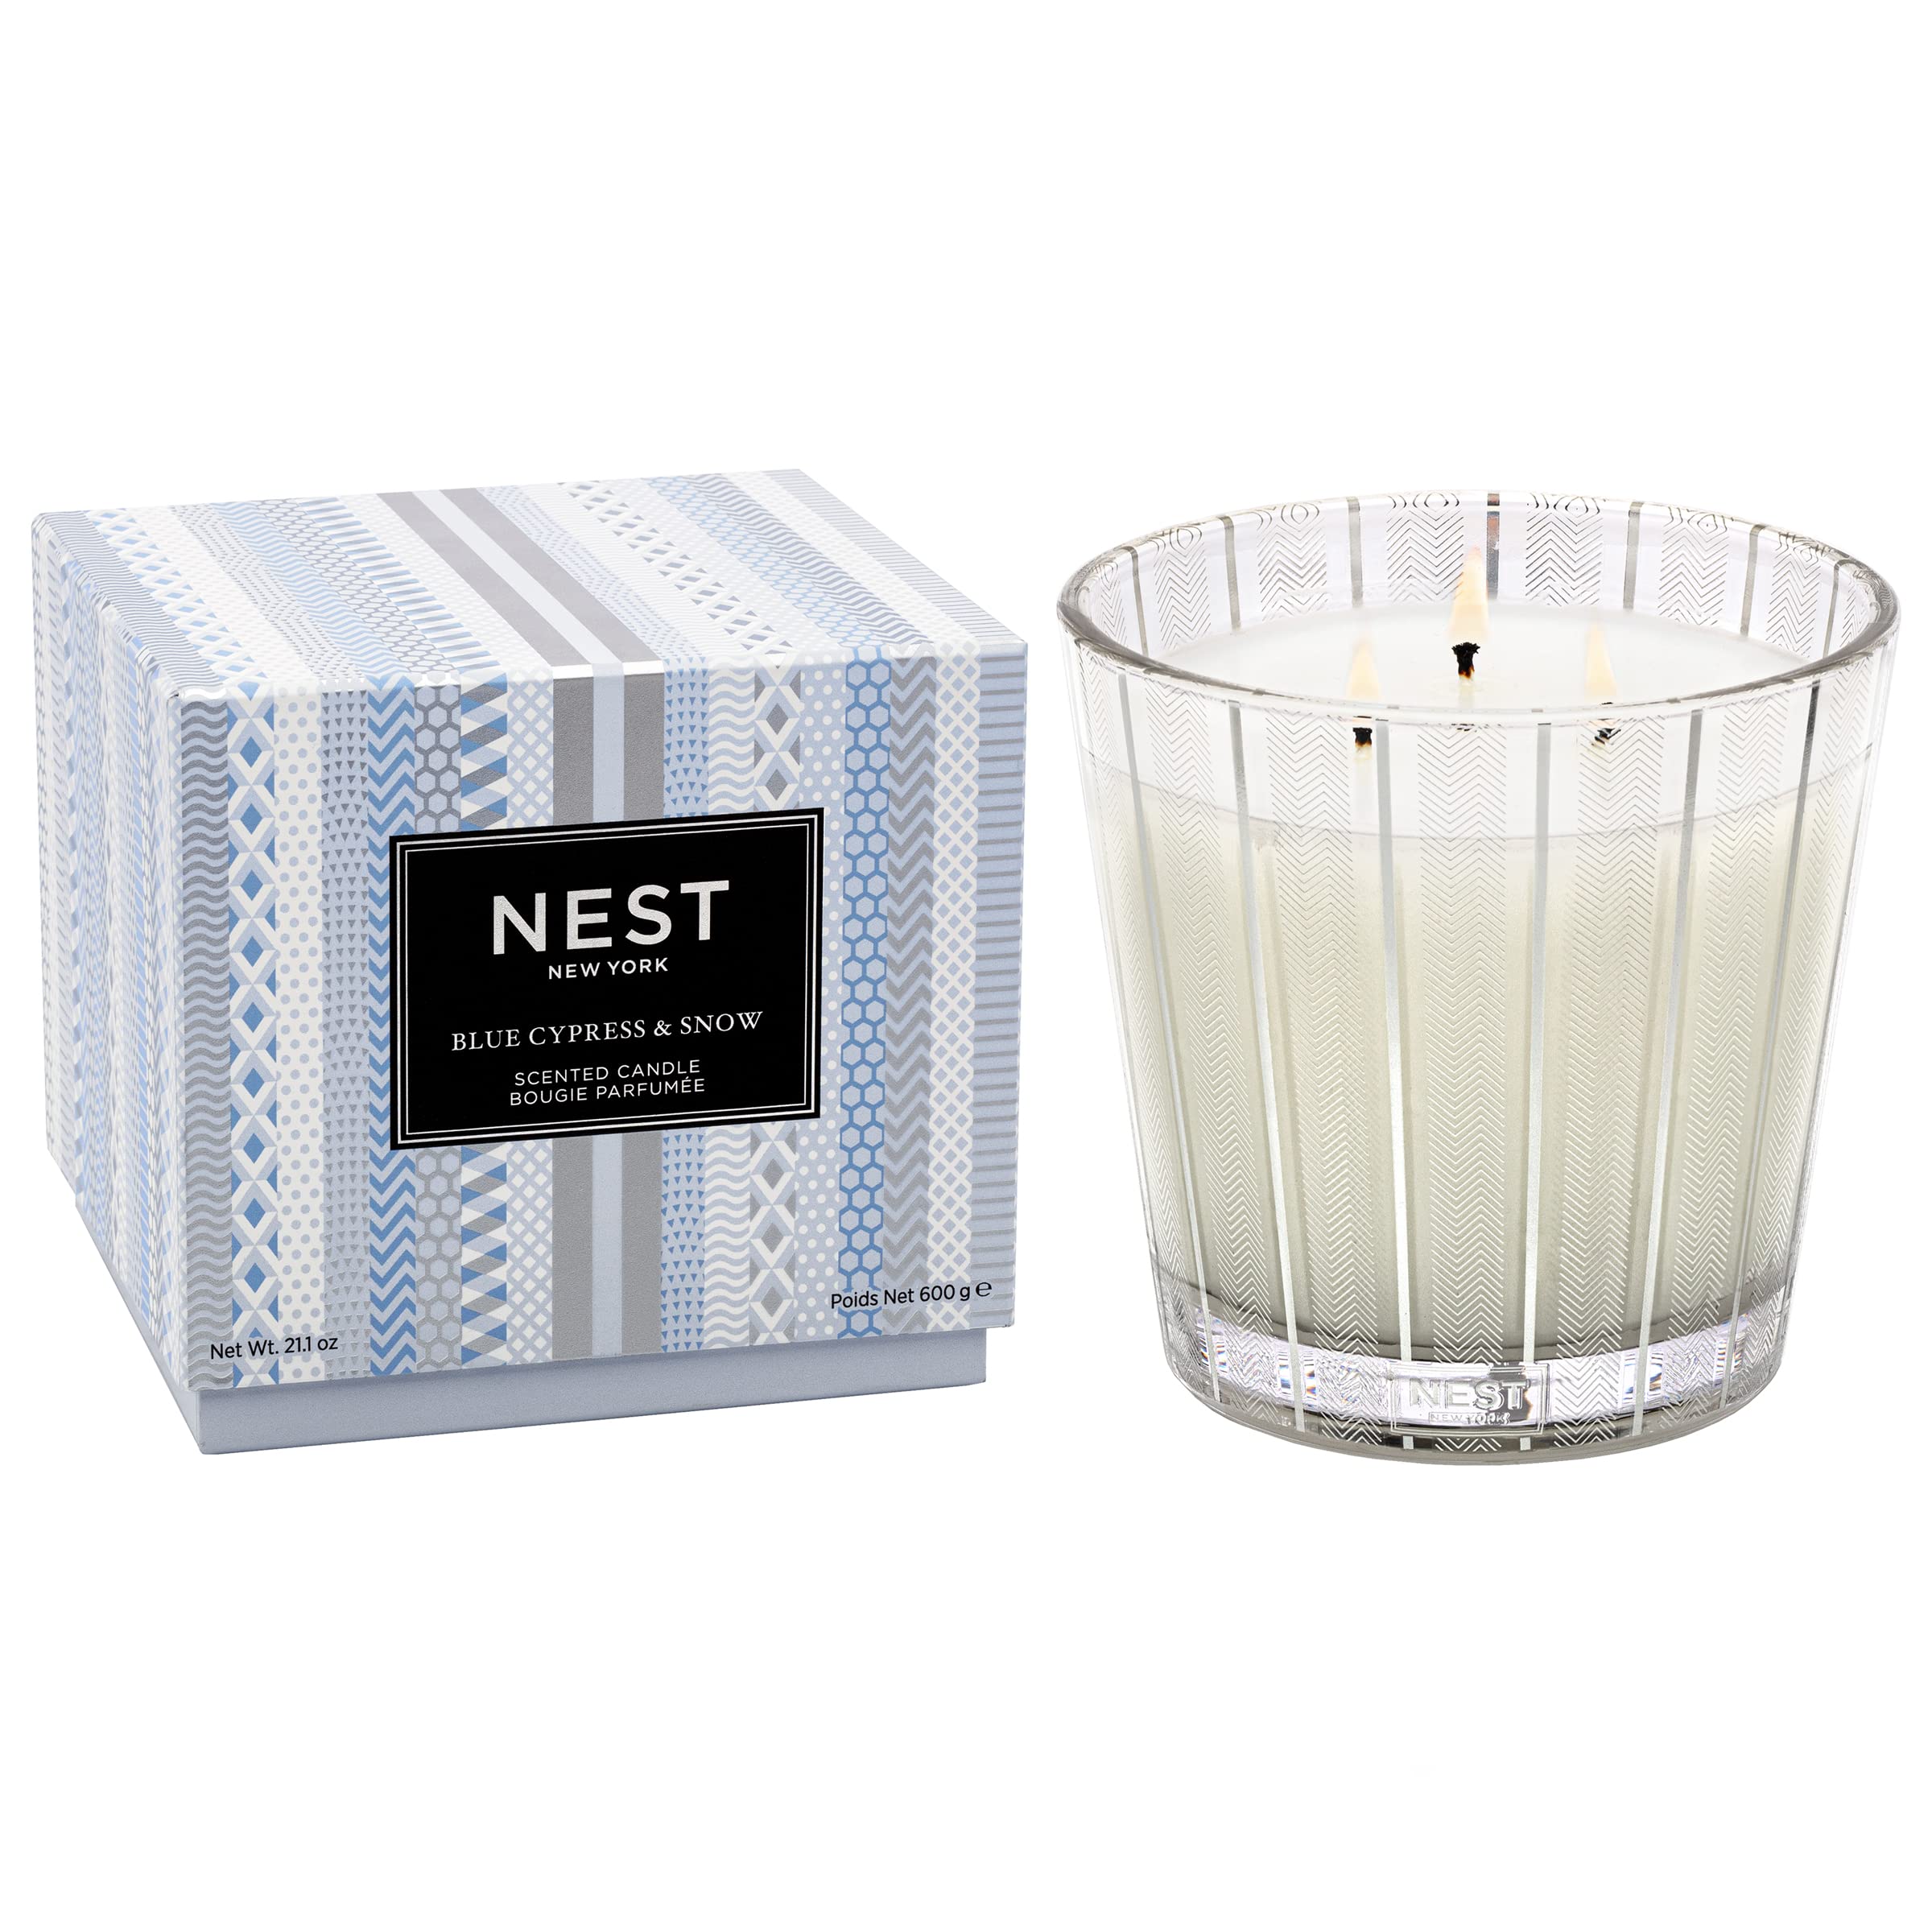 NEST Fragrances Blue Cypress & Snow Scented 3-Wick Candle